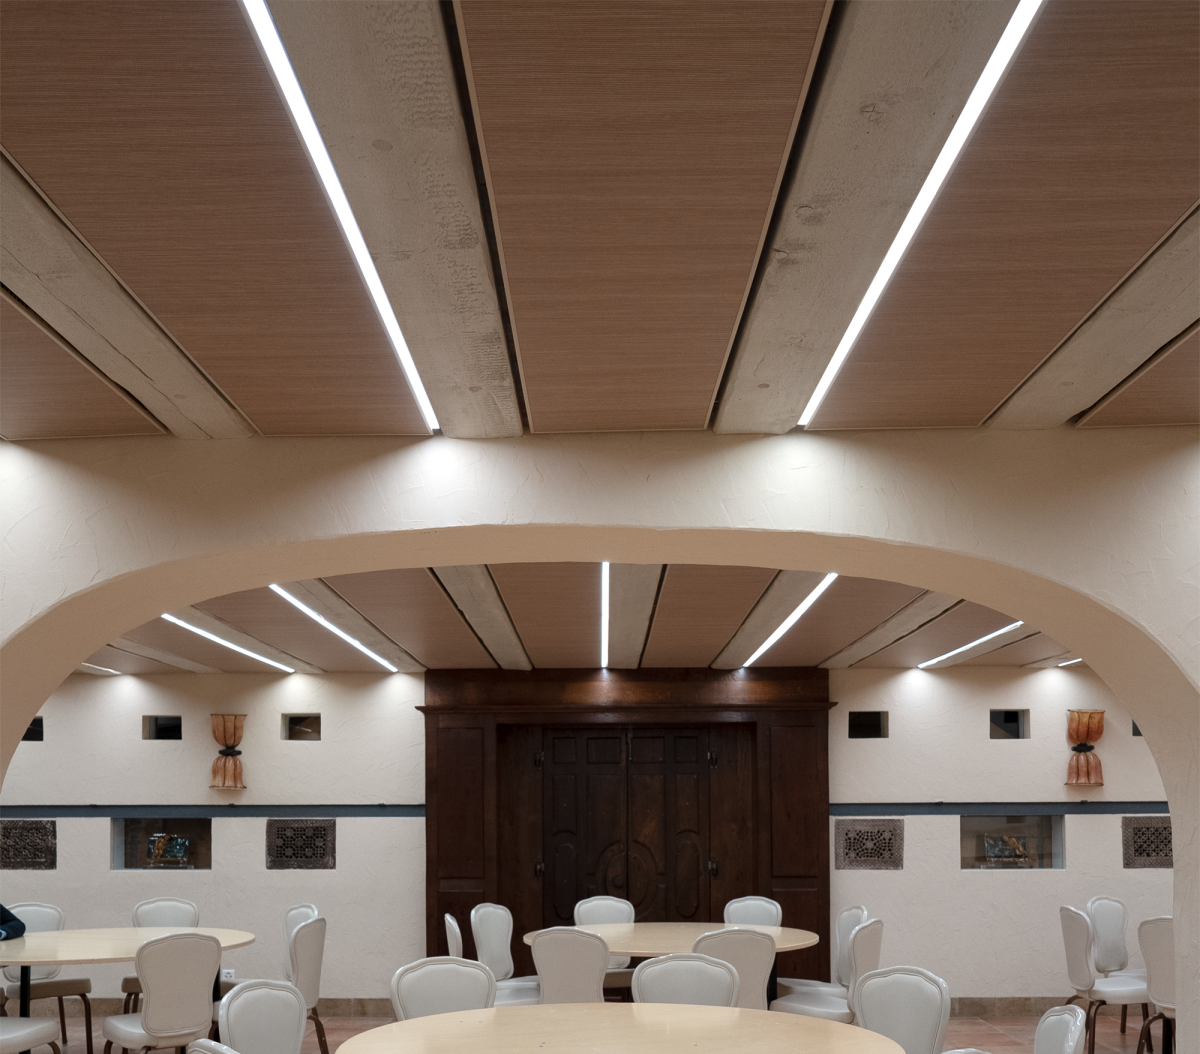 Linear recessed ceiling lighting with acoustic panels